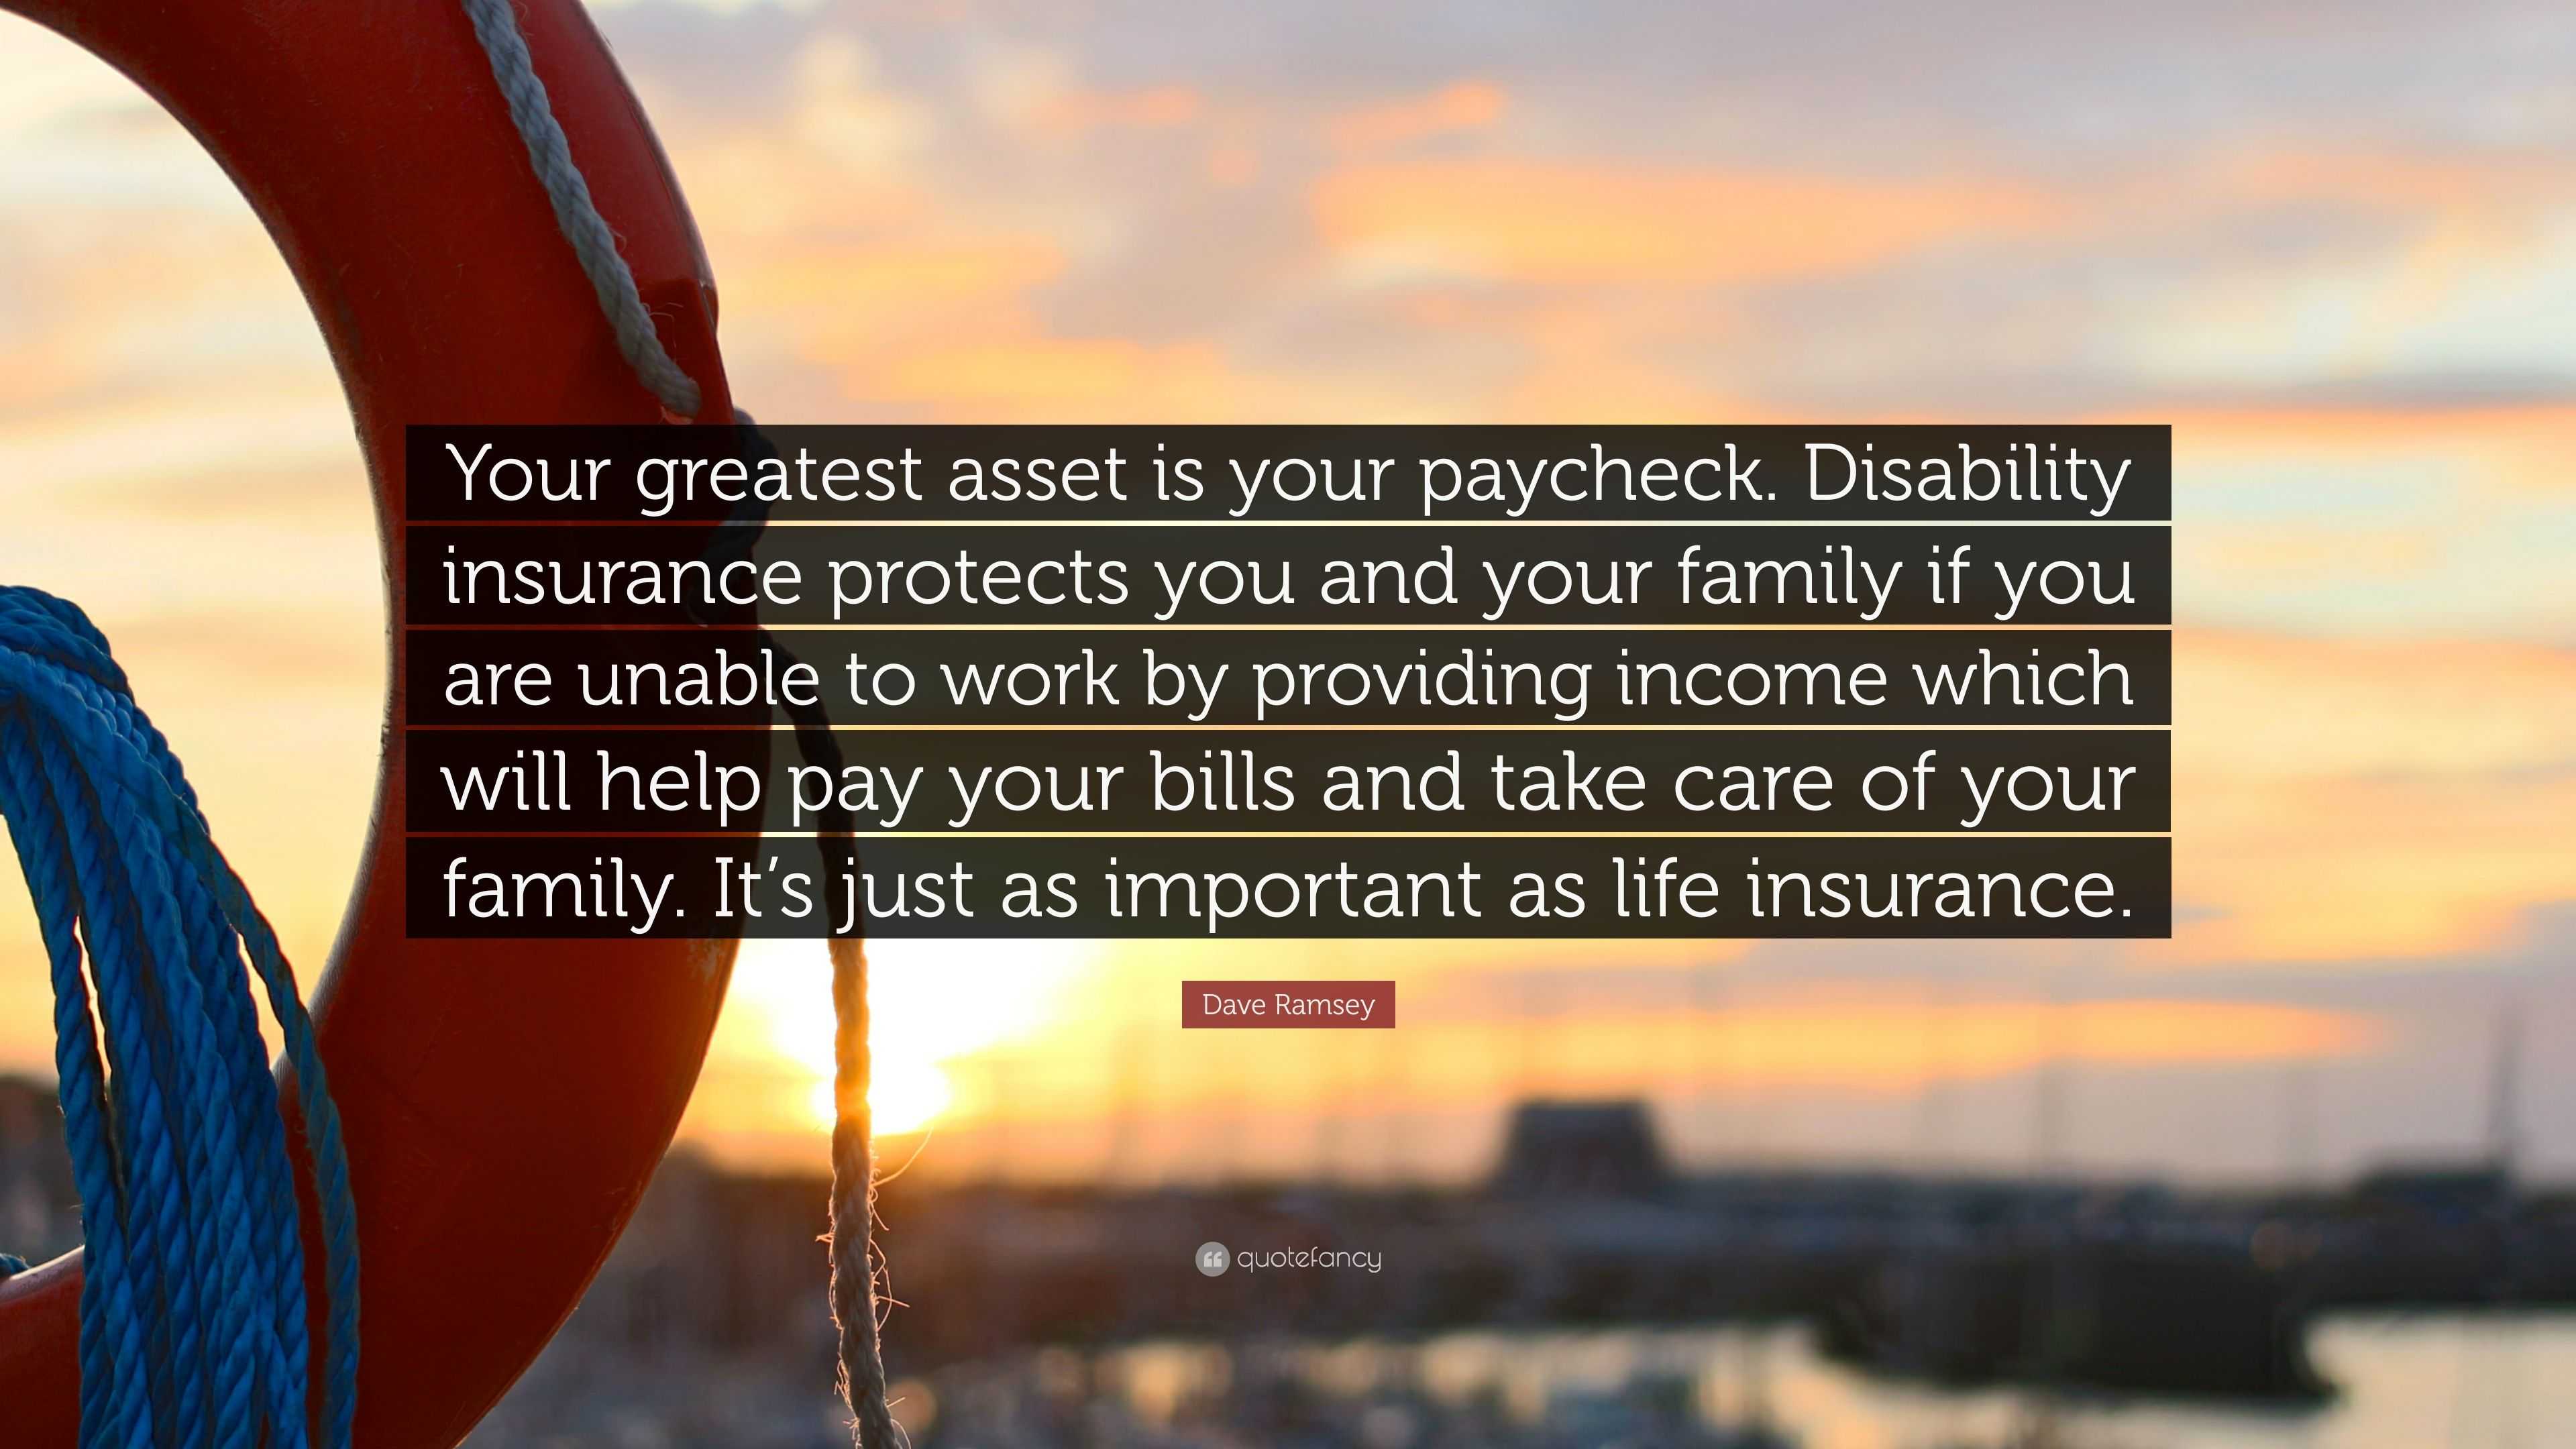 Dave Ramsey Quote “Your greatest asset is your paycheck Disability insurance protects you